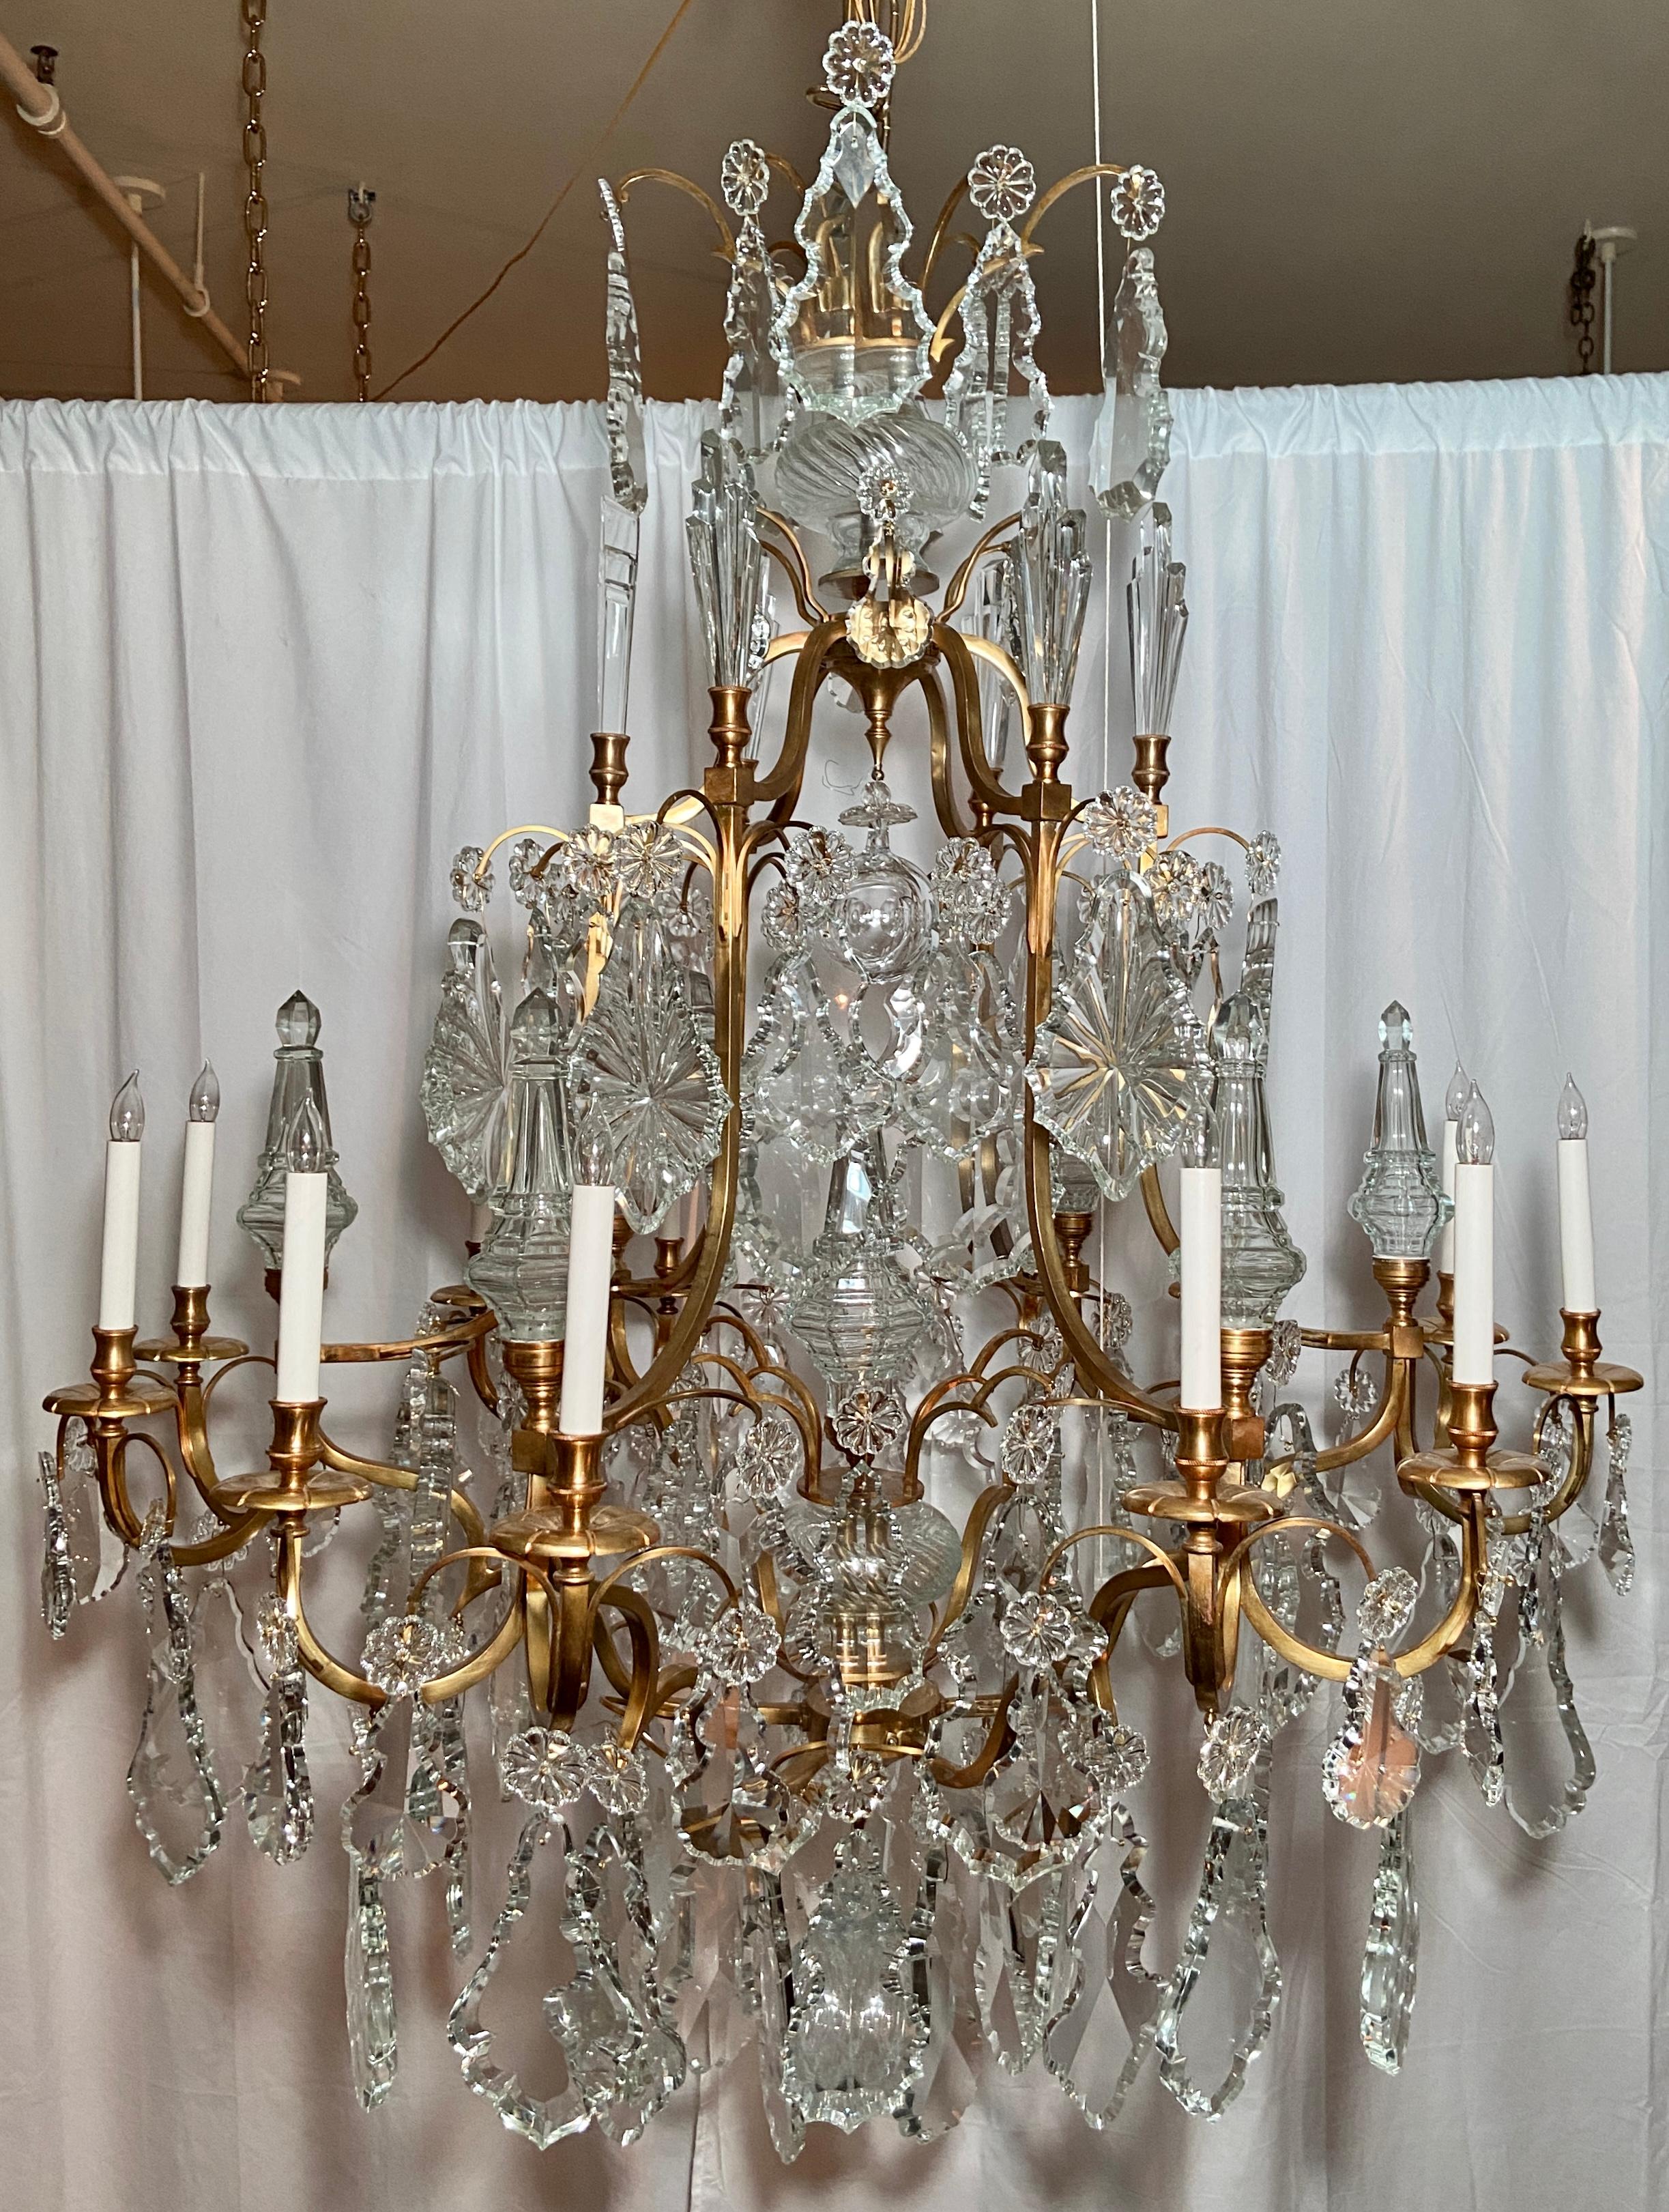 Magnificent pair Estate French Baccarat crystal and bronze D' Ore chandeliers, Circa 1940-1950.